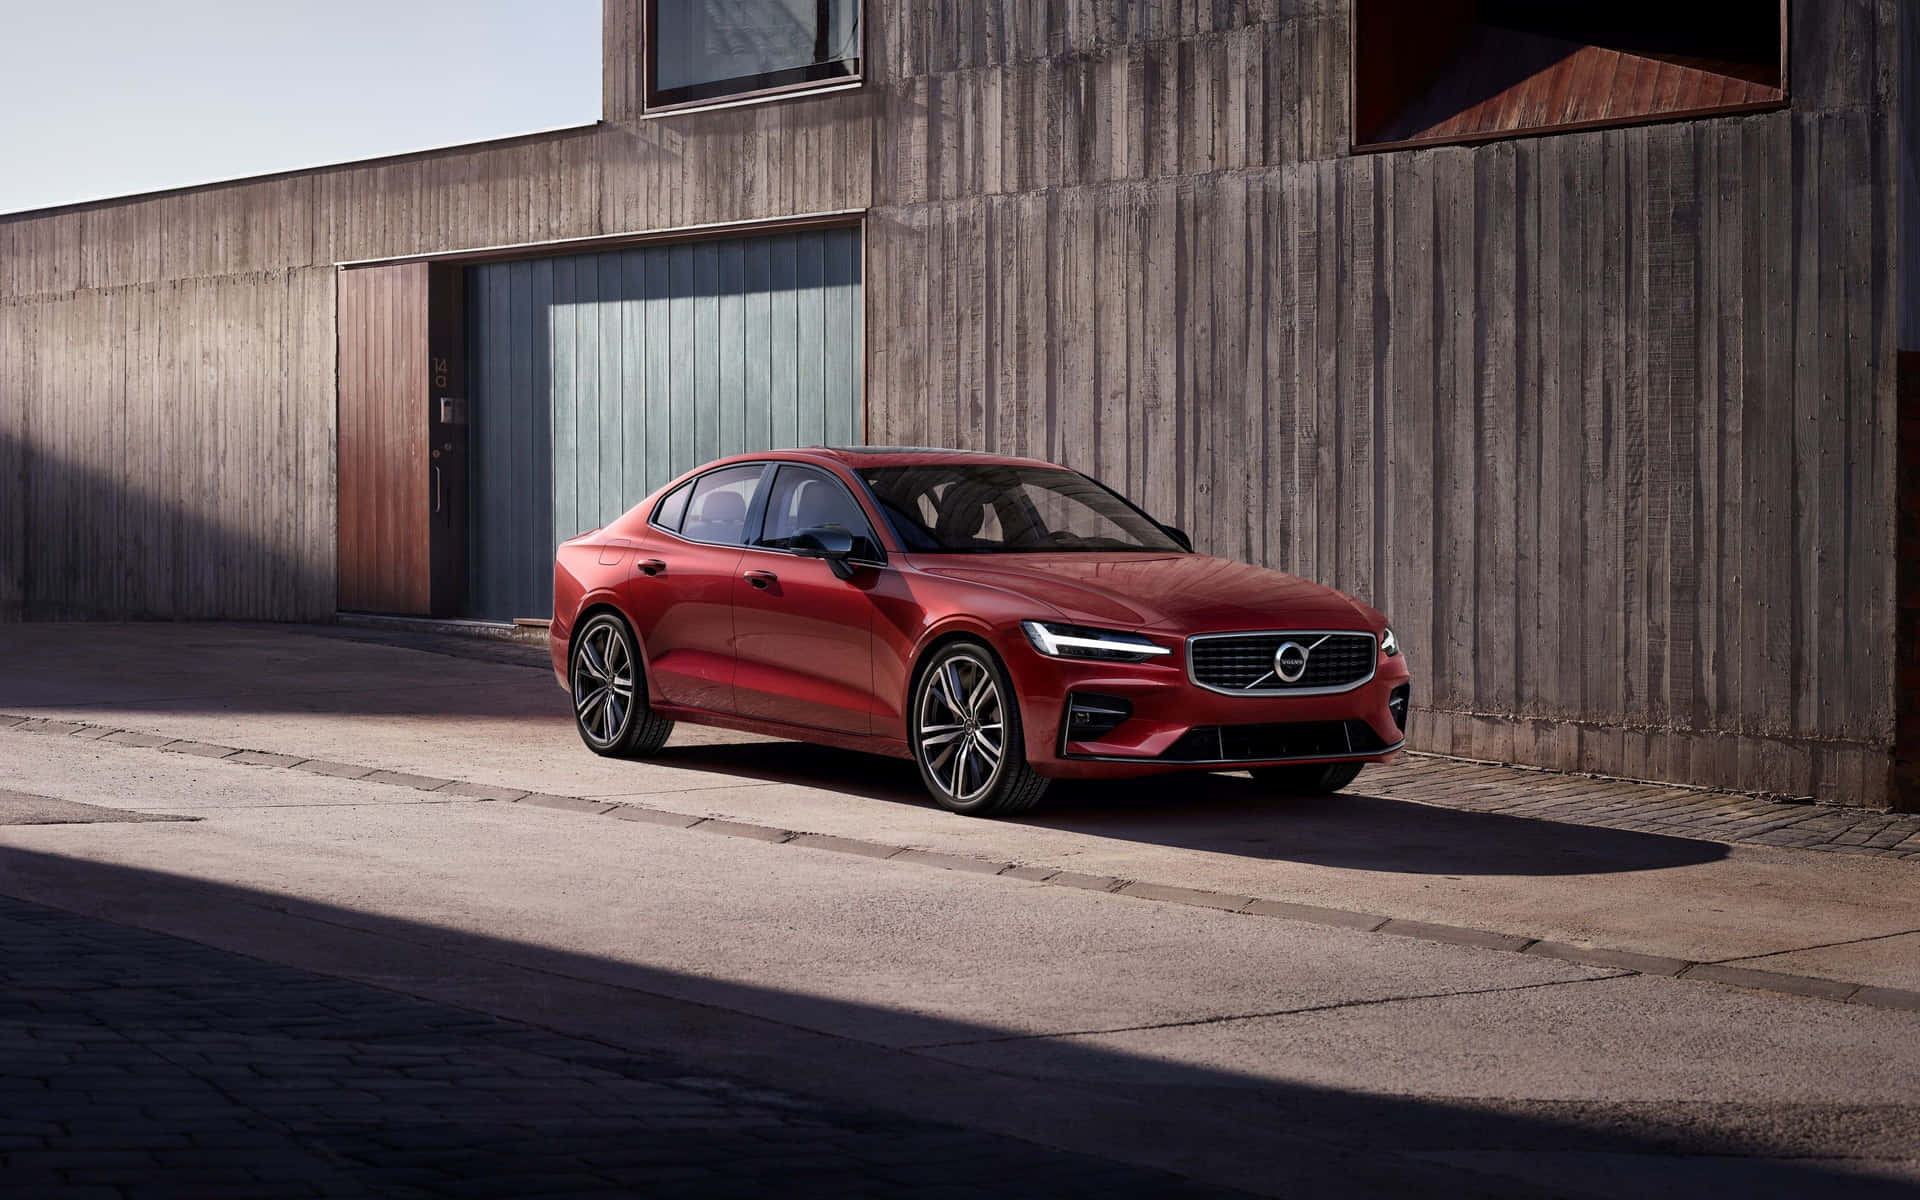 The Luxurious Volvo S60 In Red Wallpaper